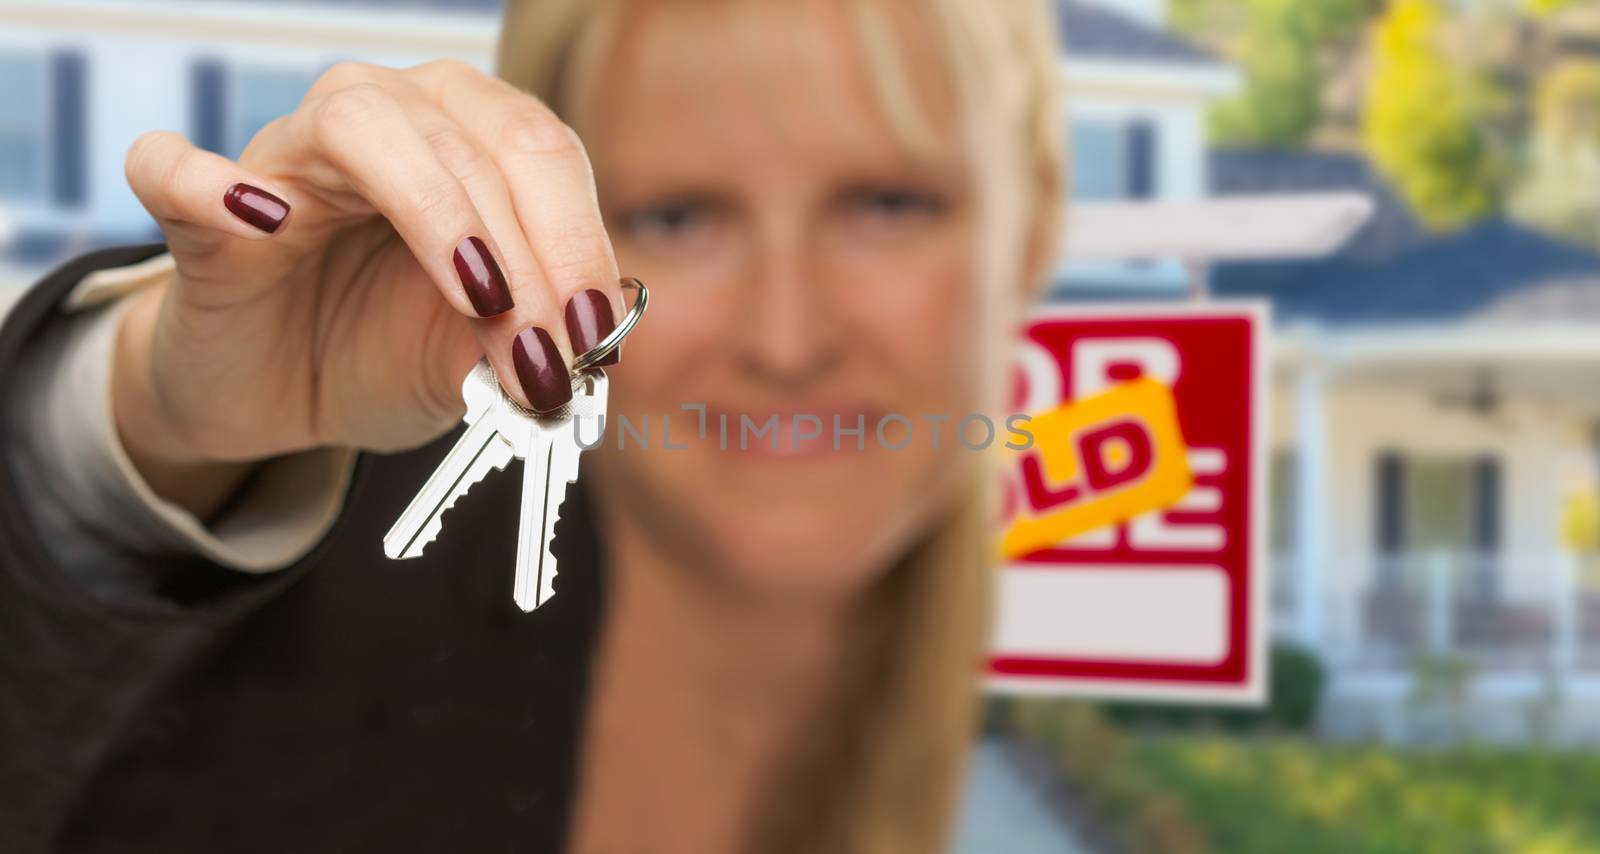 Real Estate Agent Handing Over New House Keys with Sold Sign Behind.